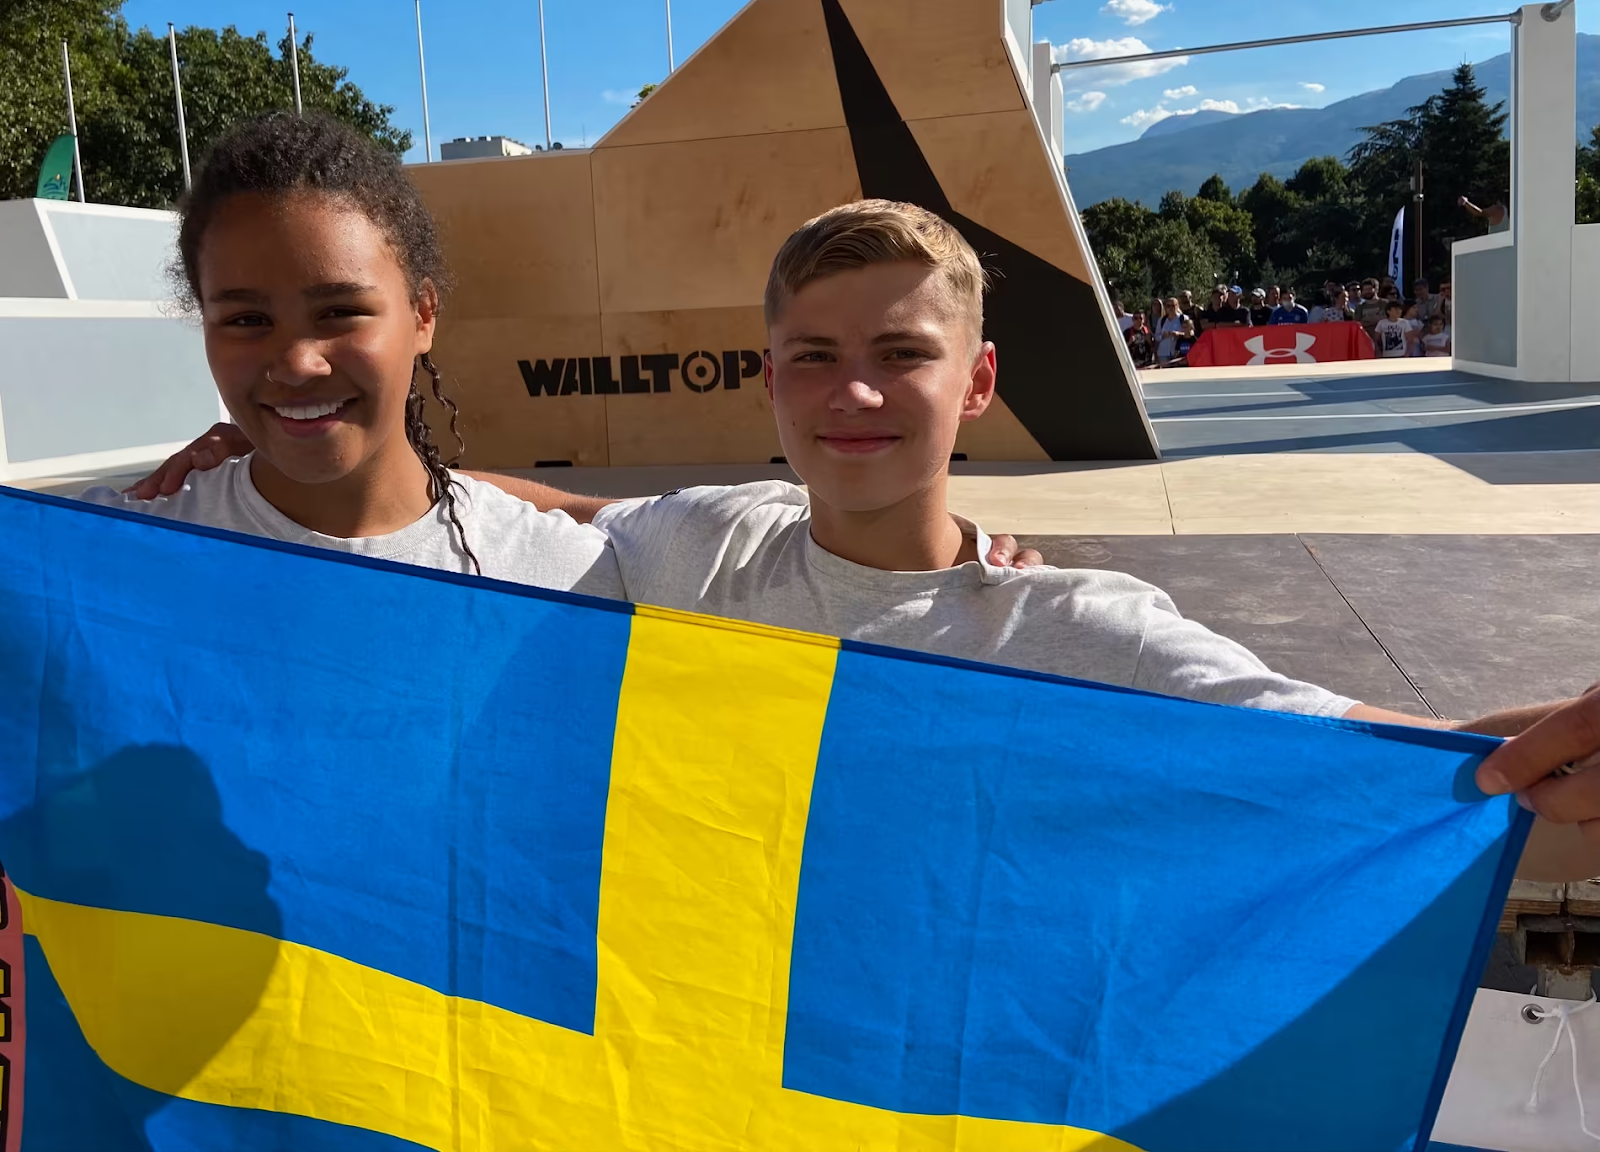 The Swedish Parkour King and Queen's quest for World Games triumph are fueled